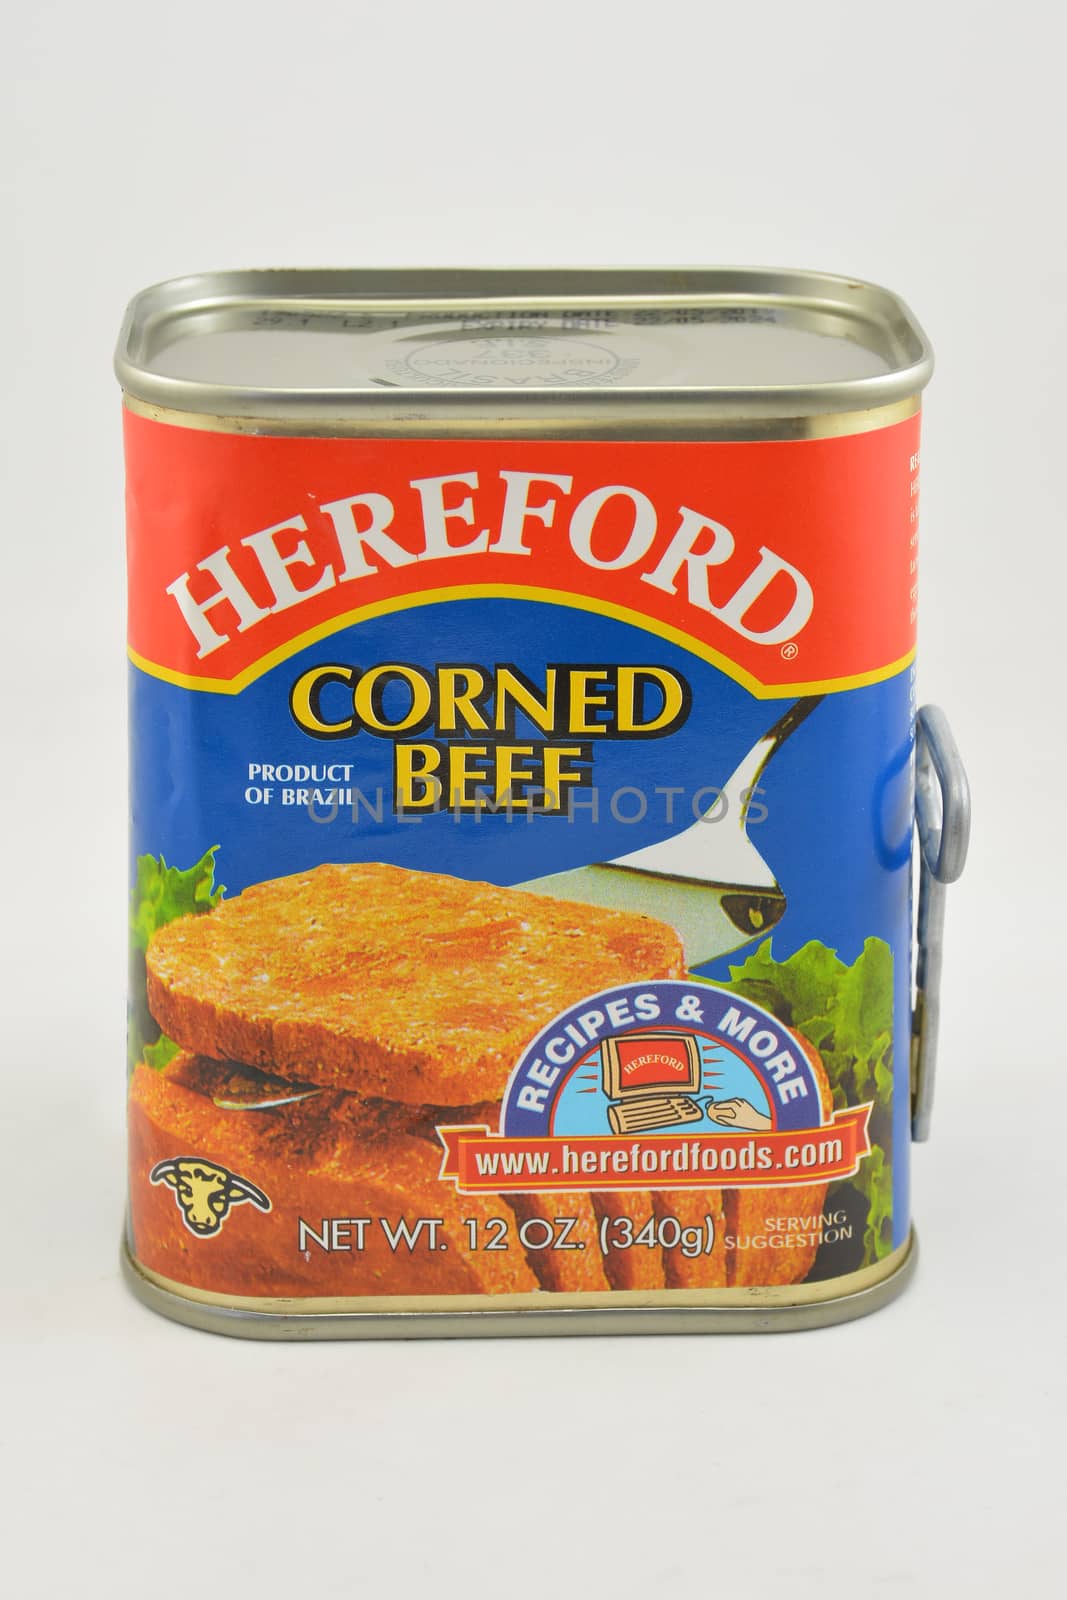 MANILA, PH - SEPT 10 - Hereford corned beef can on September 10, 2020 in Manila, Philippines.